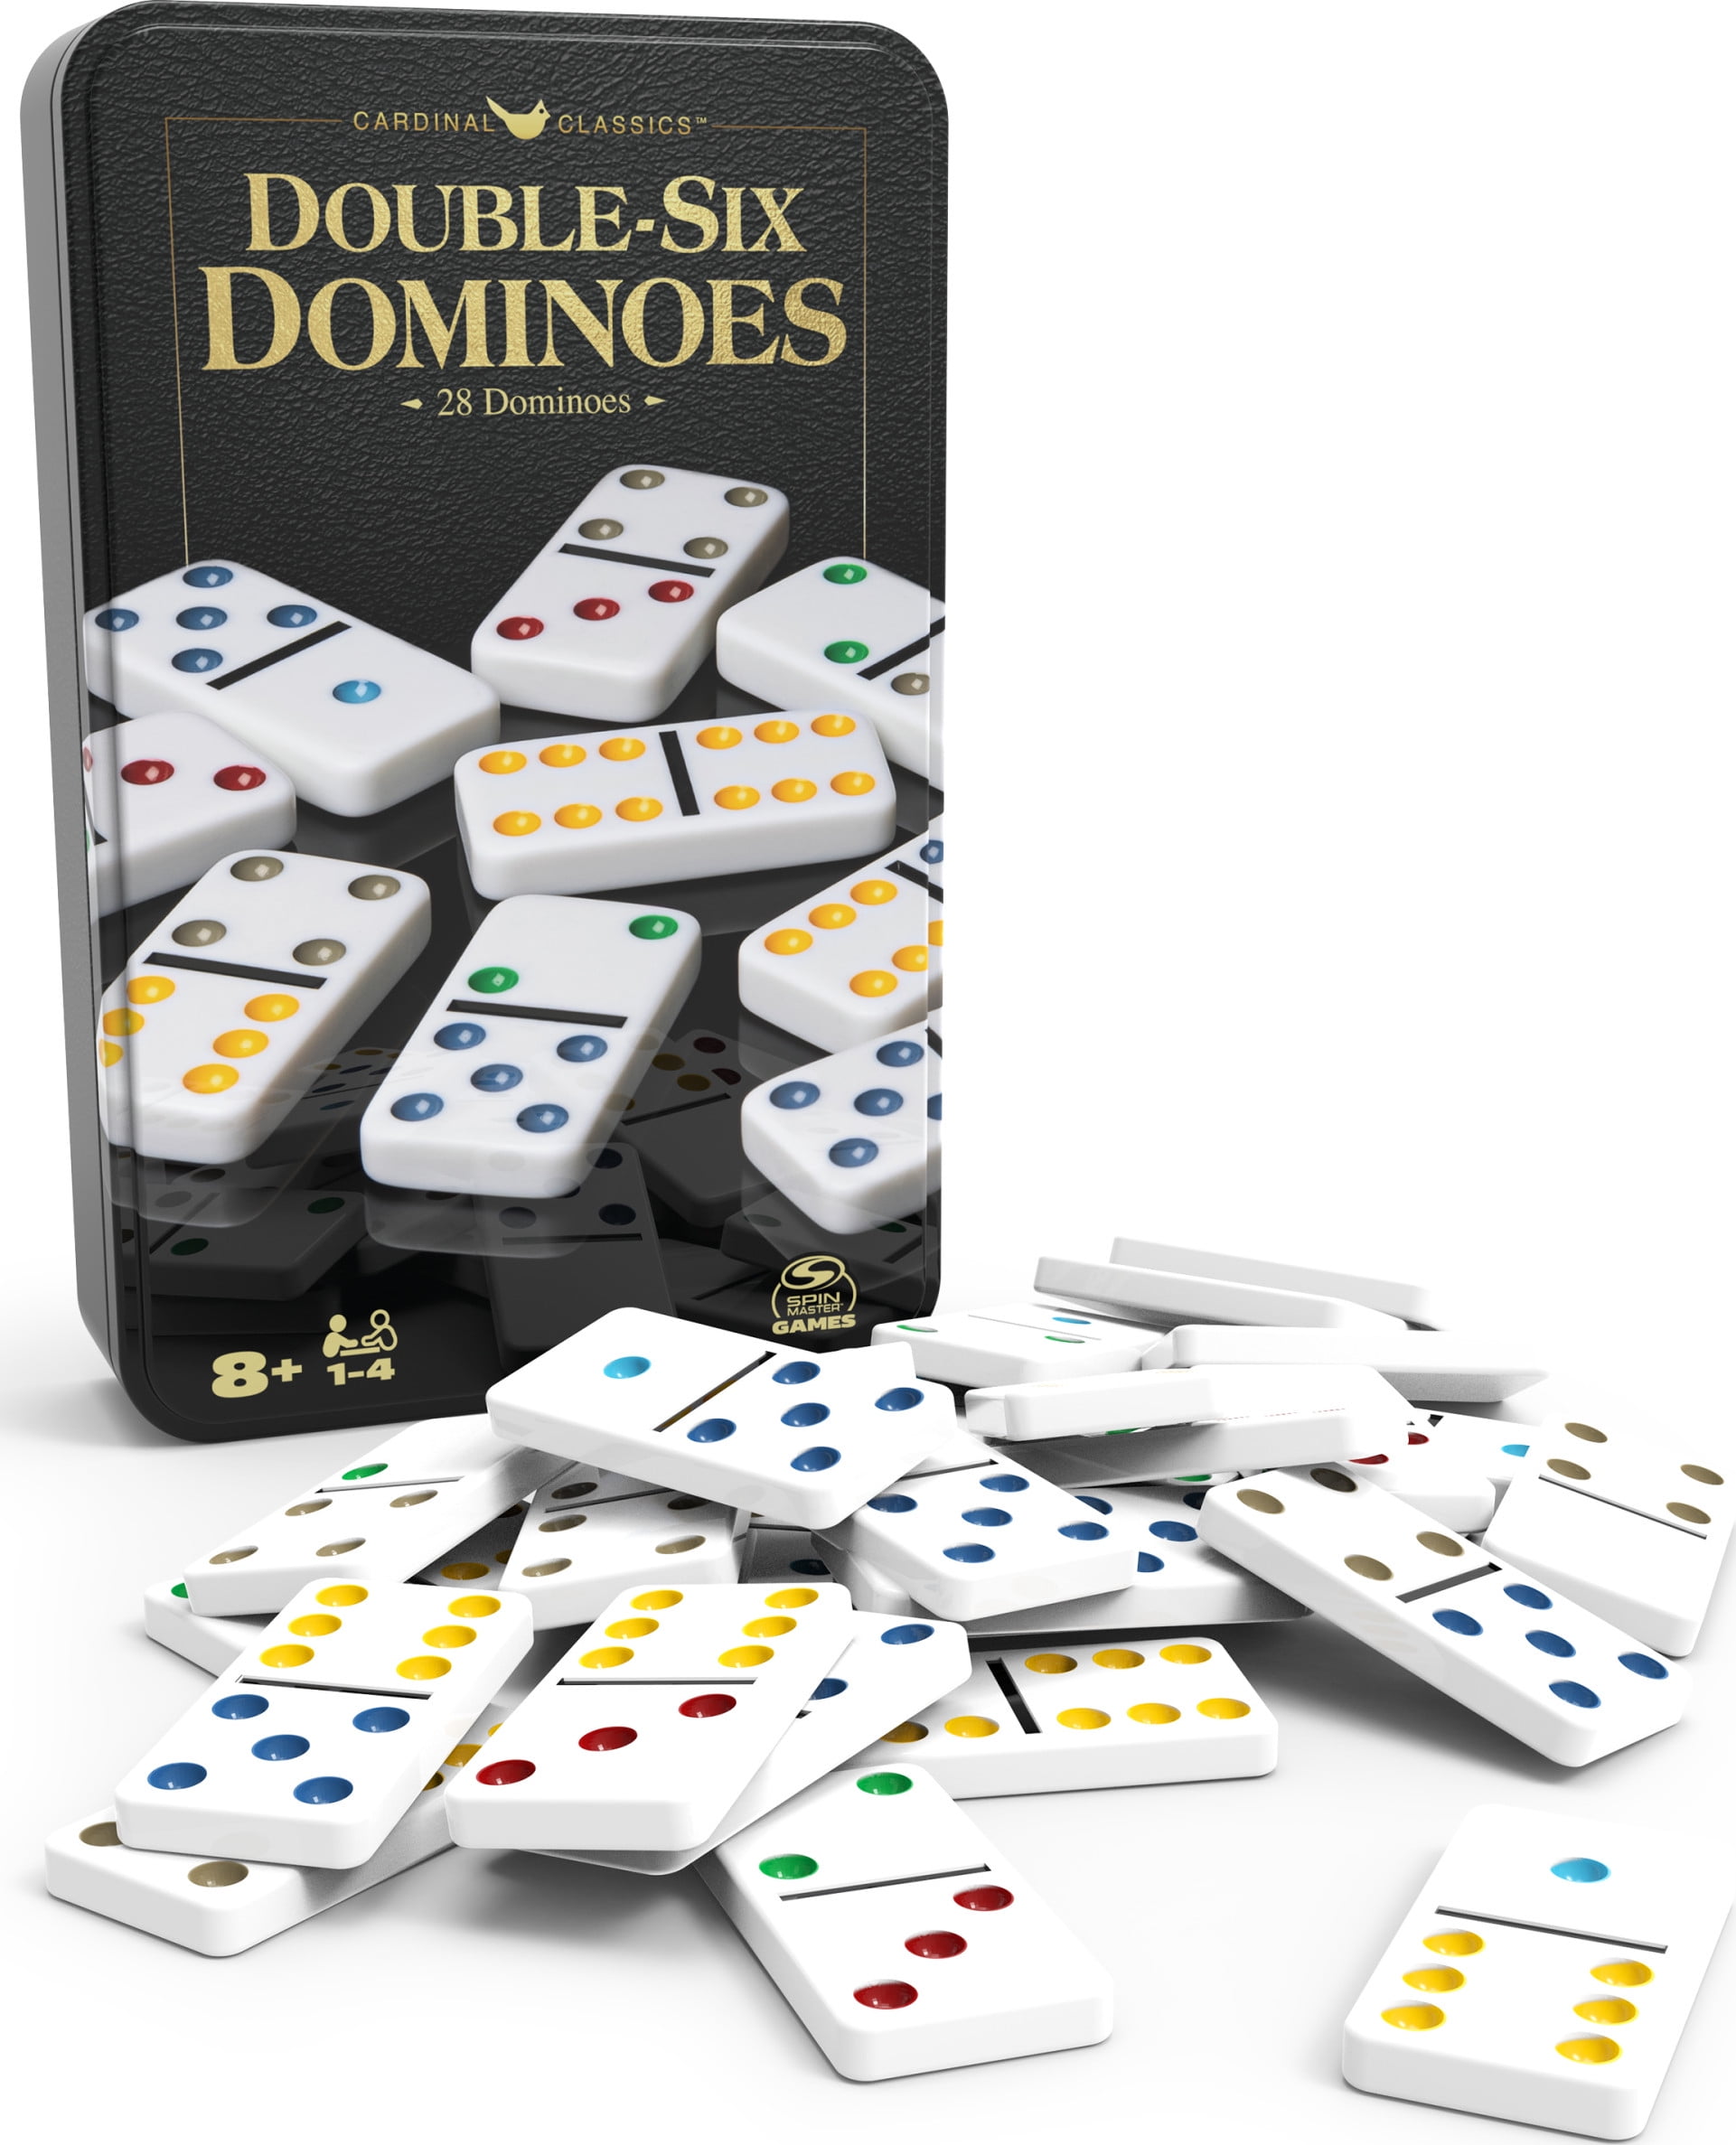 Dominoes Double 6 Six Jumbo Size Solid Wooden Case And Tiles Set of 28 Pcs New